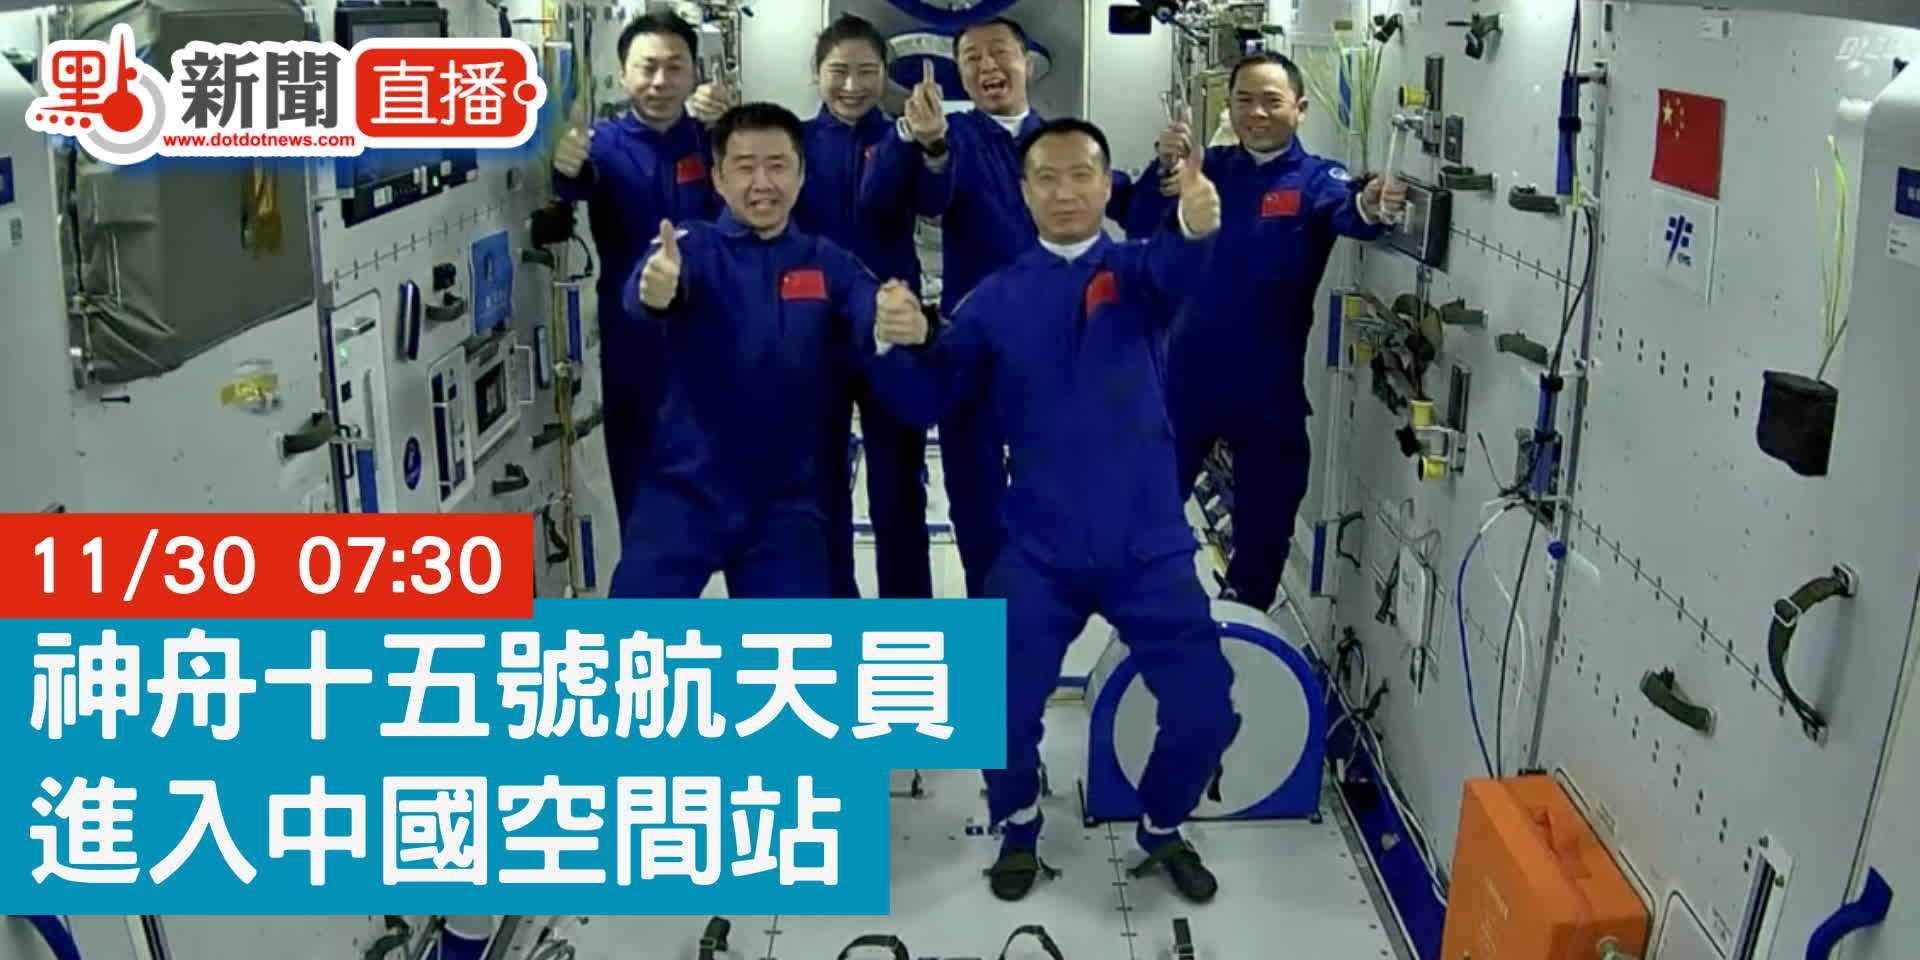 Shenzhou-15 astronauts enter China space station core module, adding manpower at in-orbit space lab to six